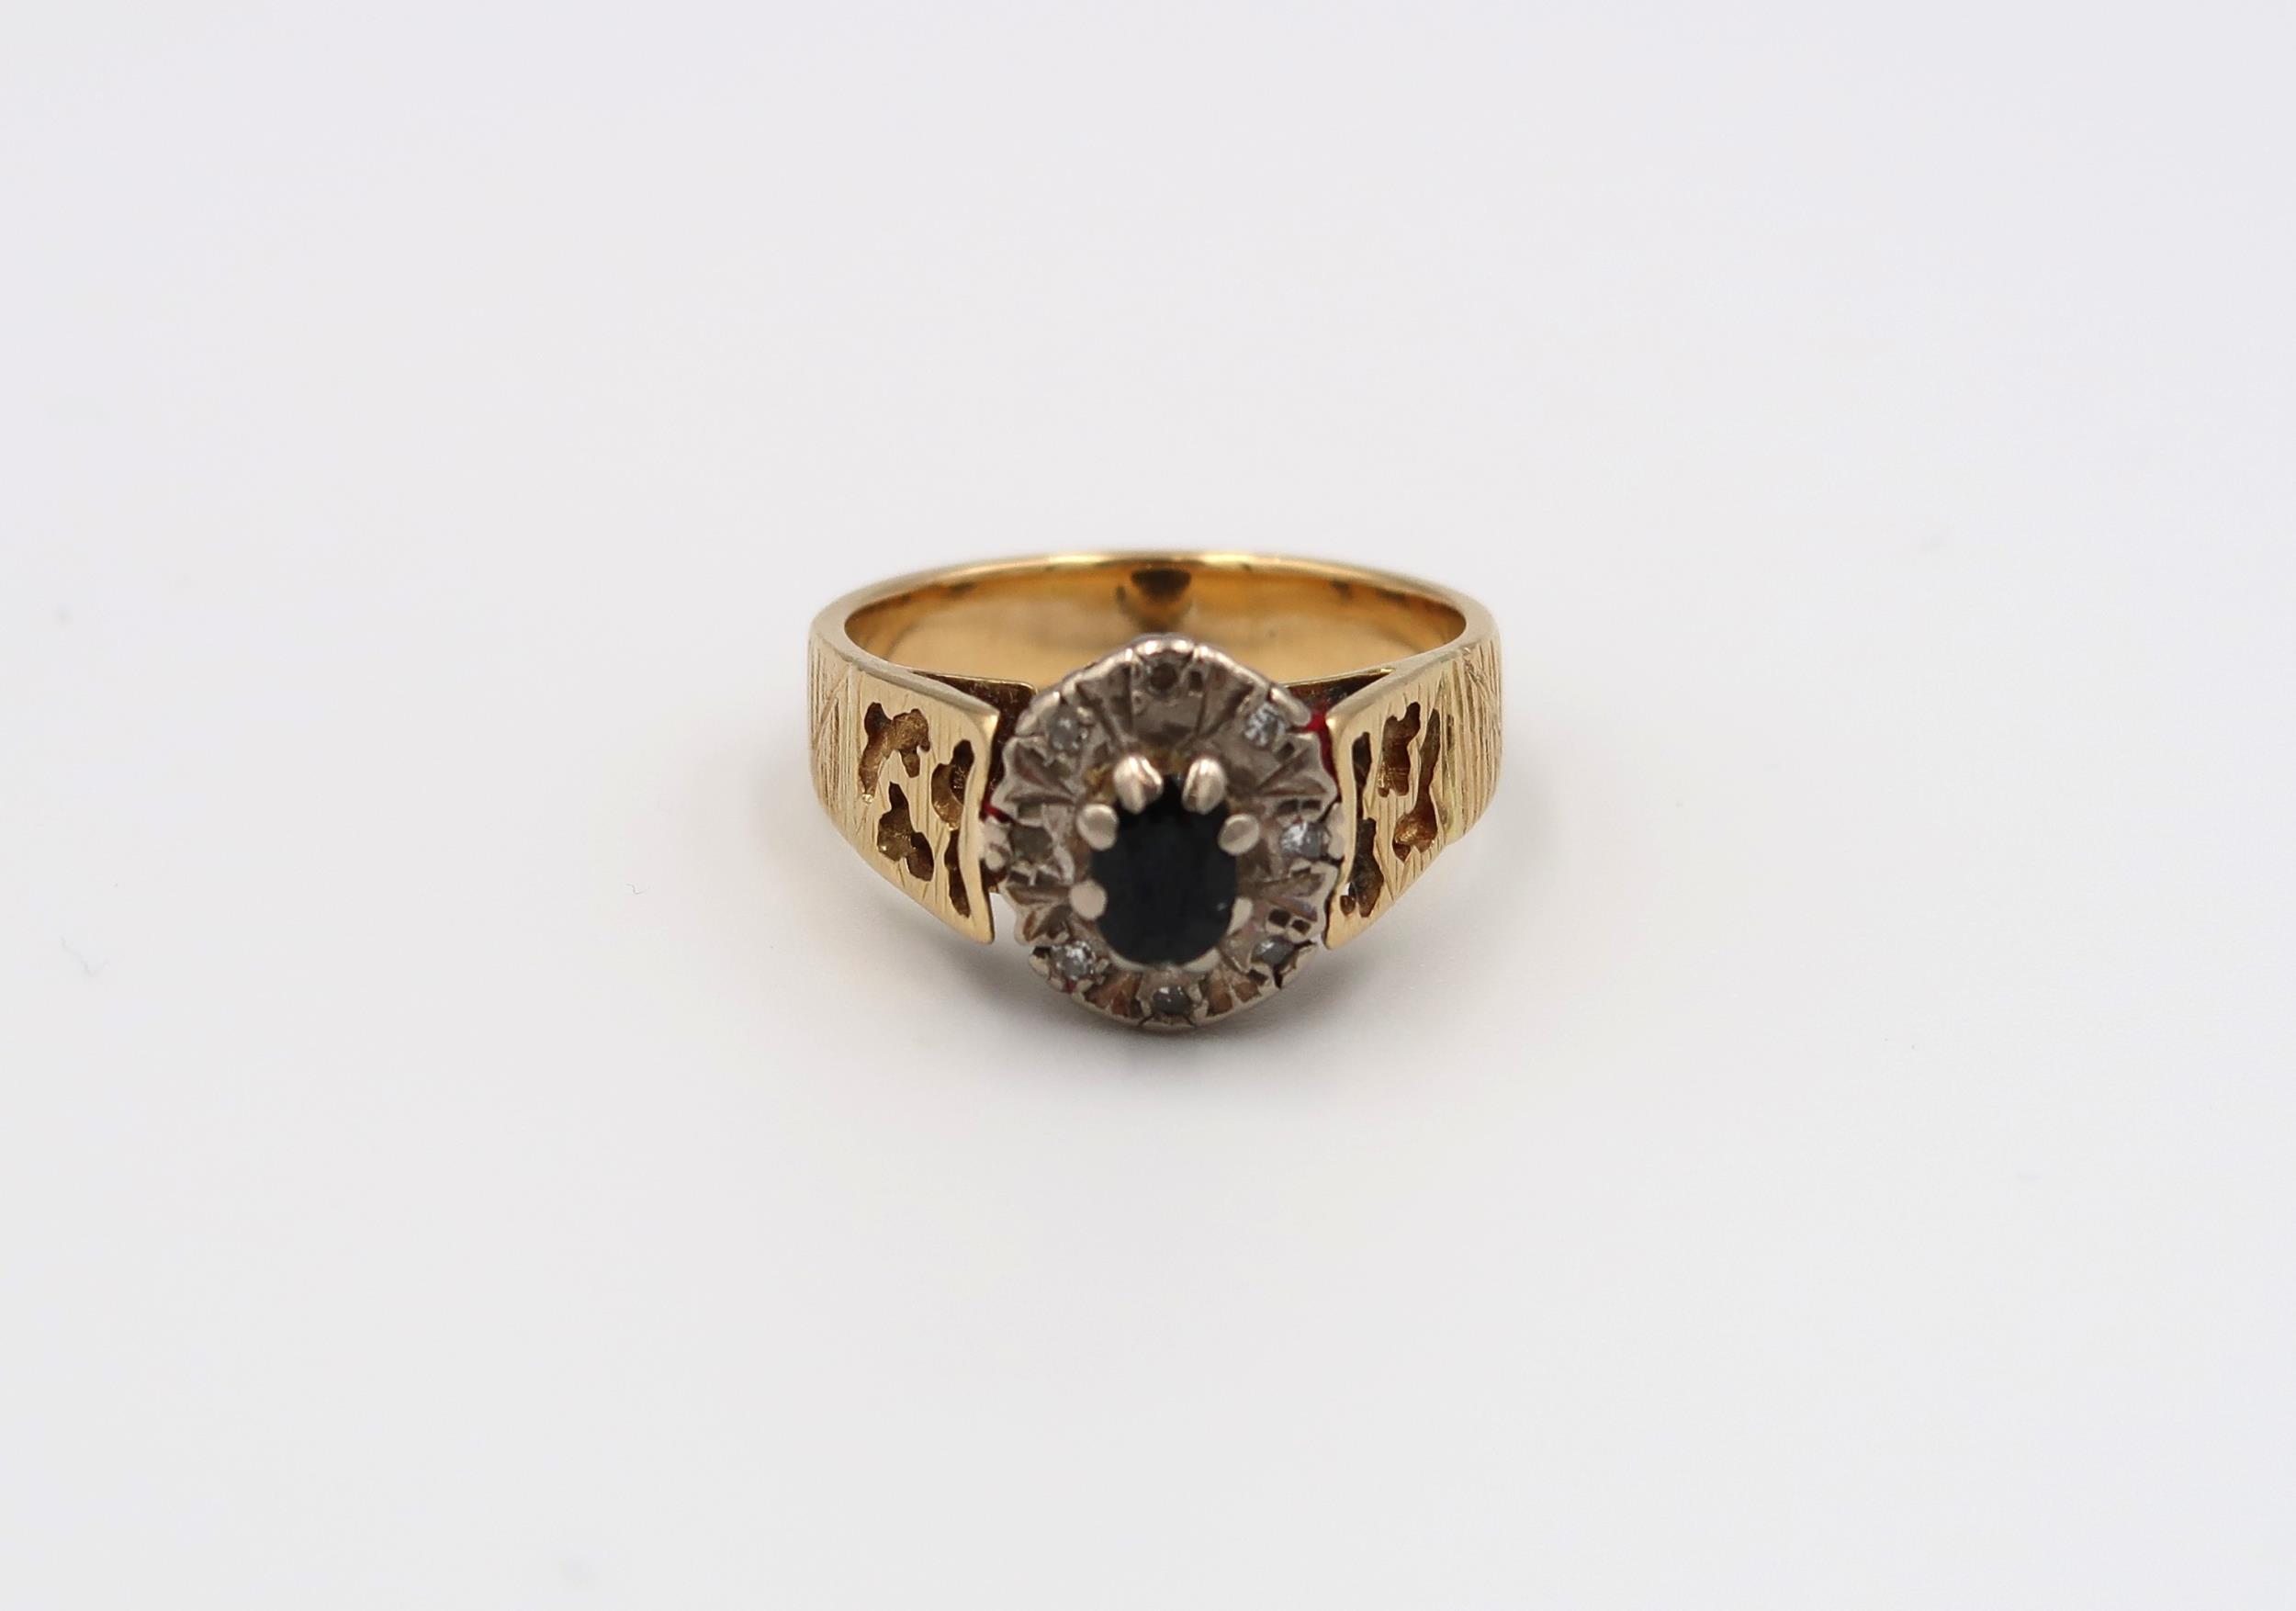 A Poss 18ct yellow and white gold dress ring with oval cut sapphire surrounded by 8 small old cut